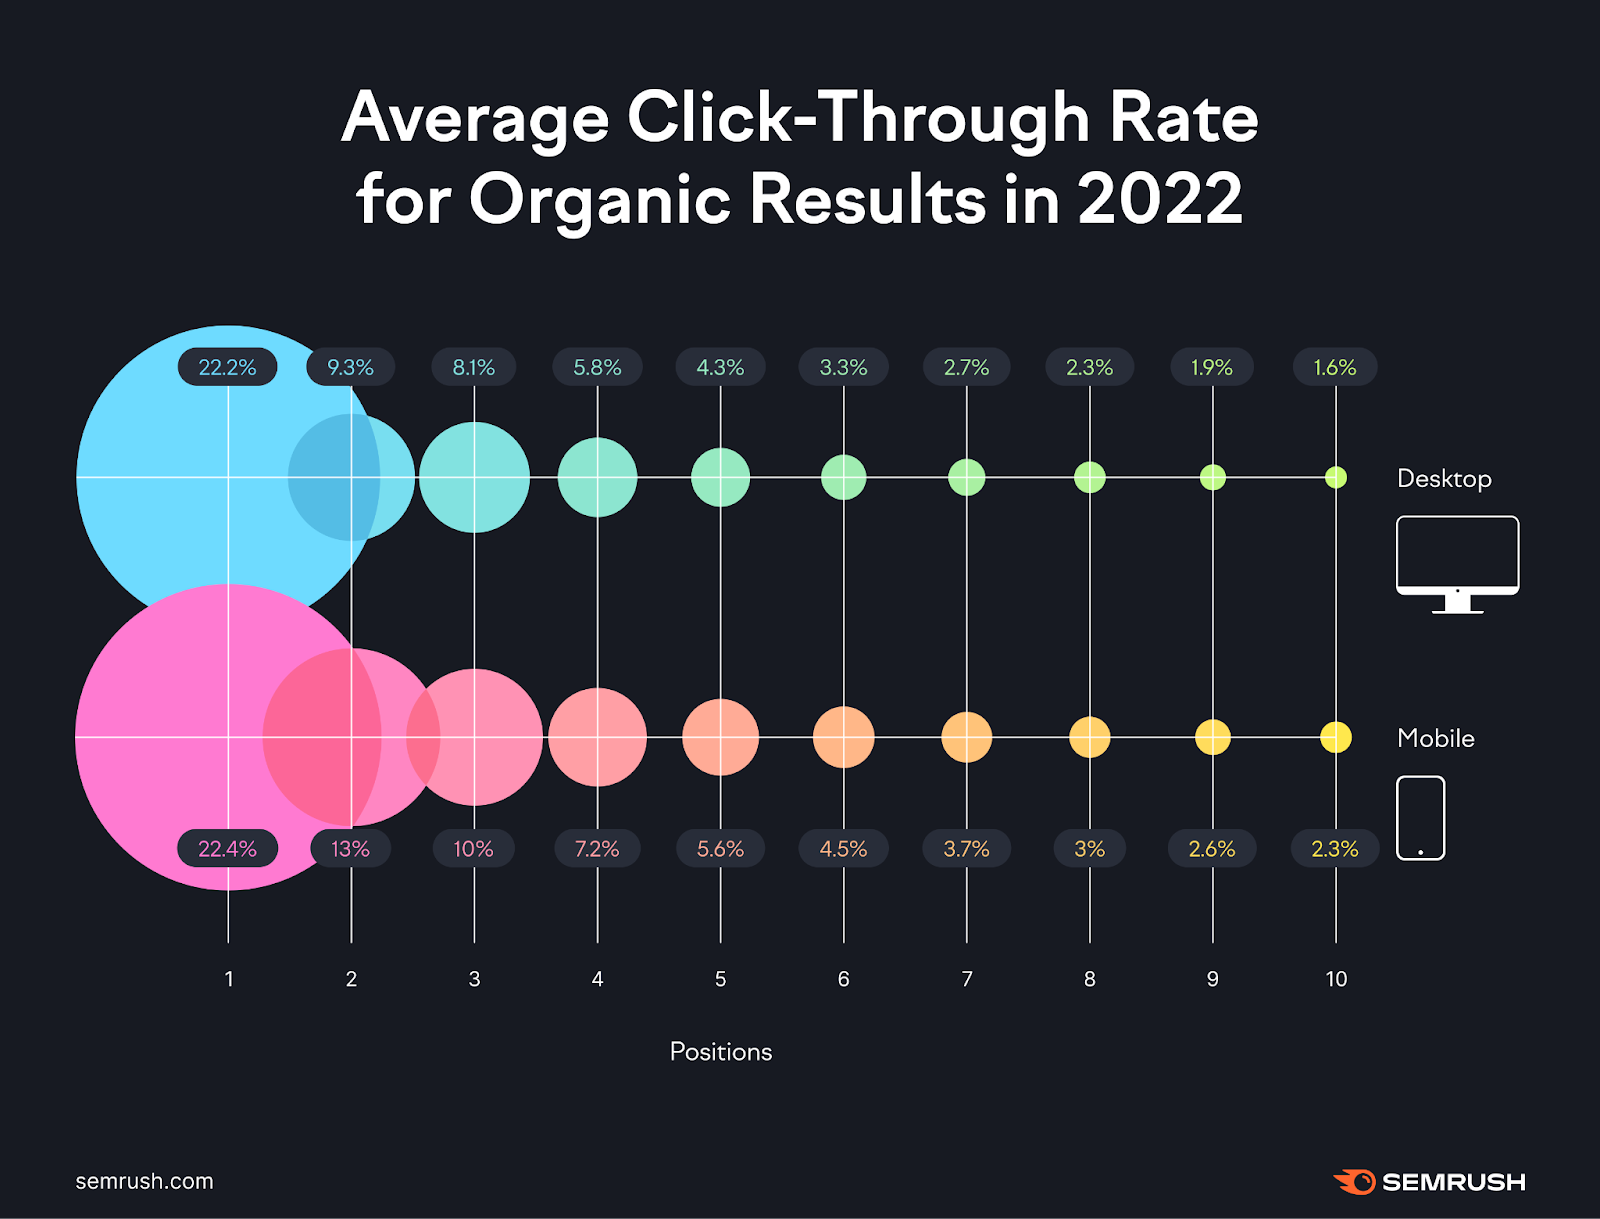 an infographic by Semrush showing an average click-through rate for organic results in 2022